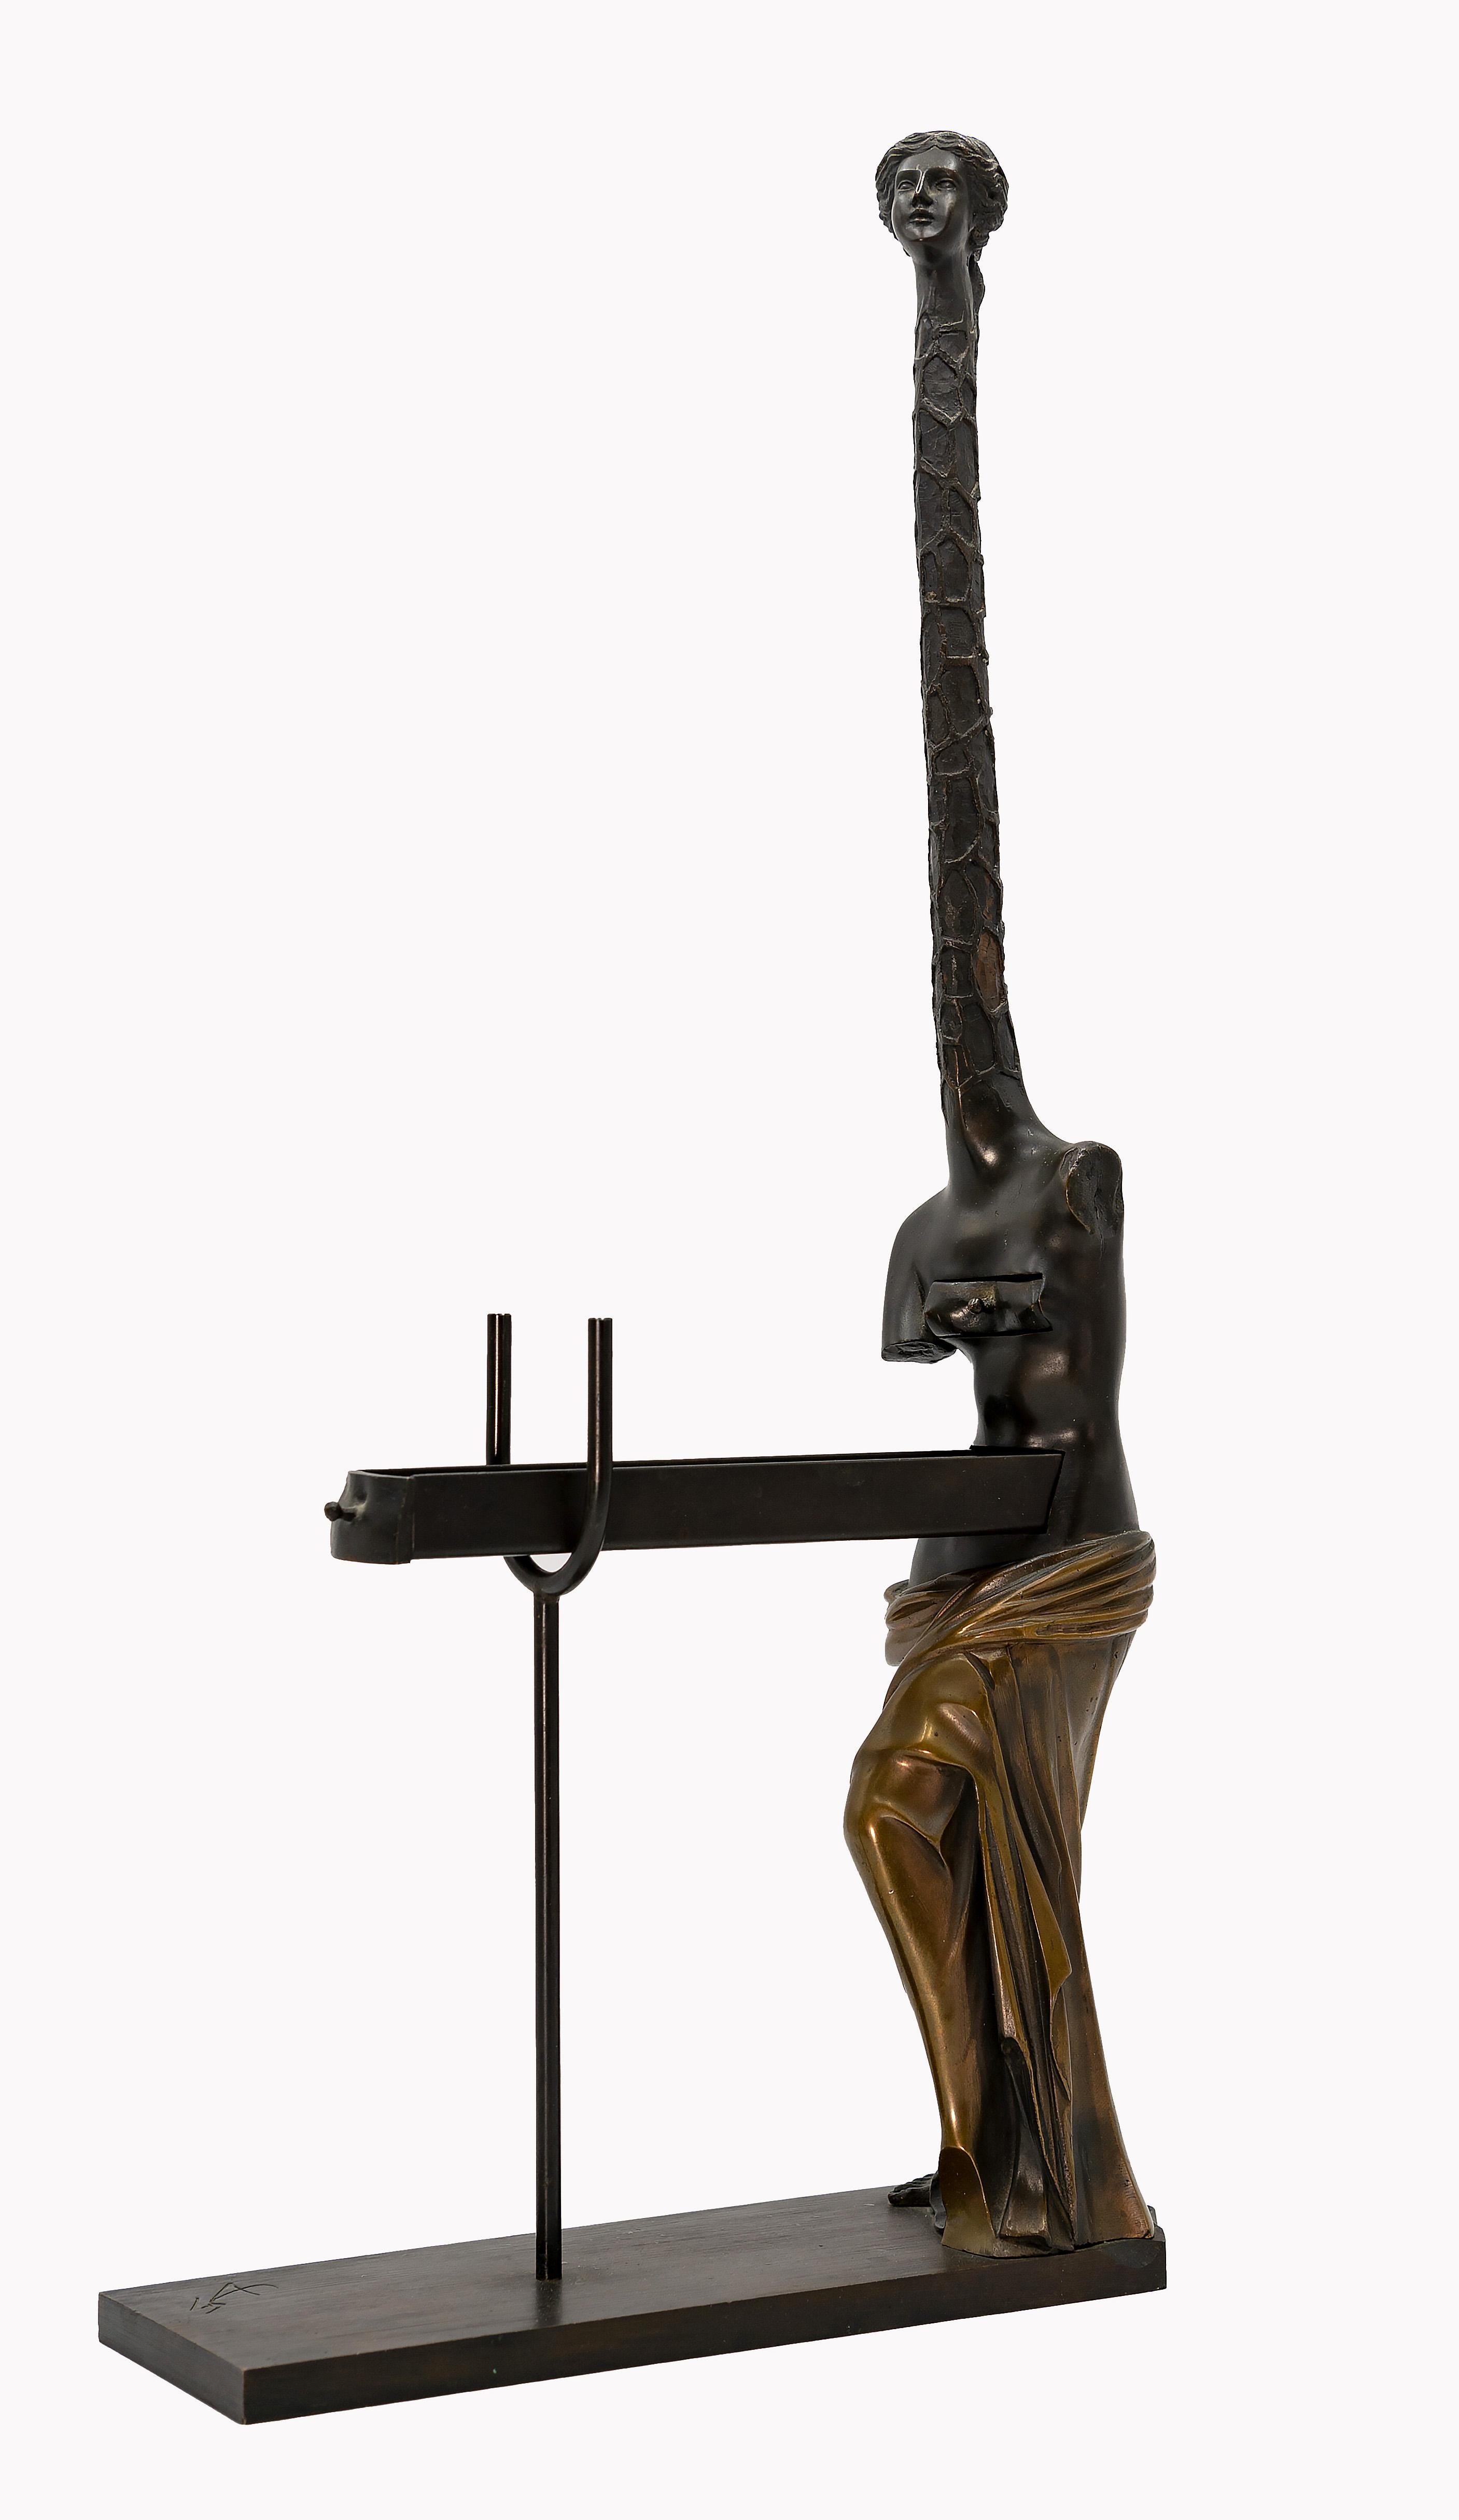 Venus à la girafe is an original contemporary artwork realized by Salvador Dalì in 1973.

Limited Edition of 1500 numbered pieces. Our specimen is the 1045/1500.

Bronze, patinated in brown and gold, on a bronze plate. 

Fusion by Venturi Arte